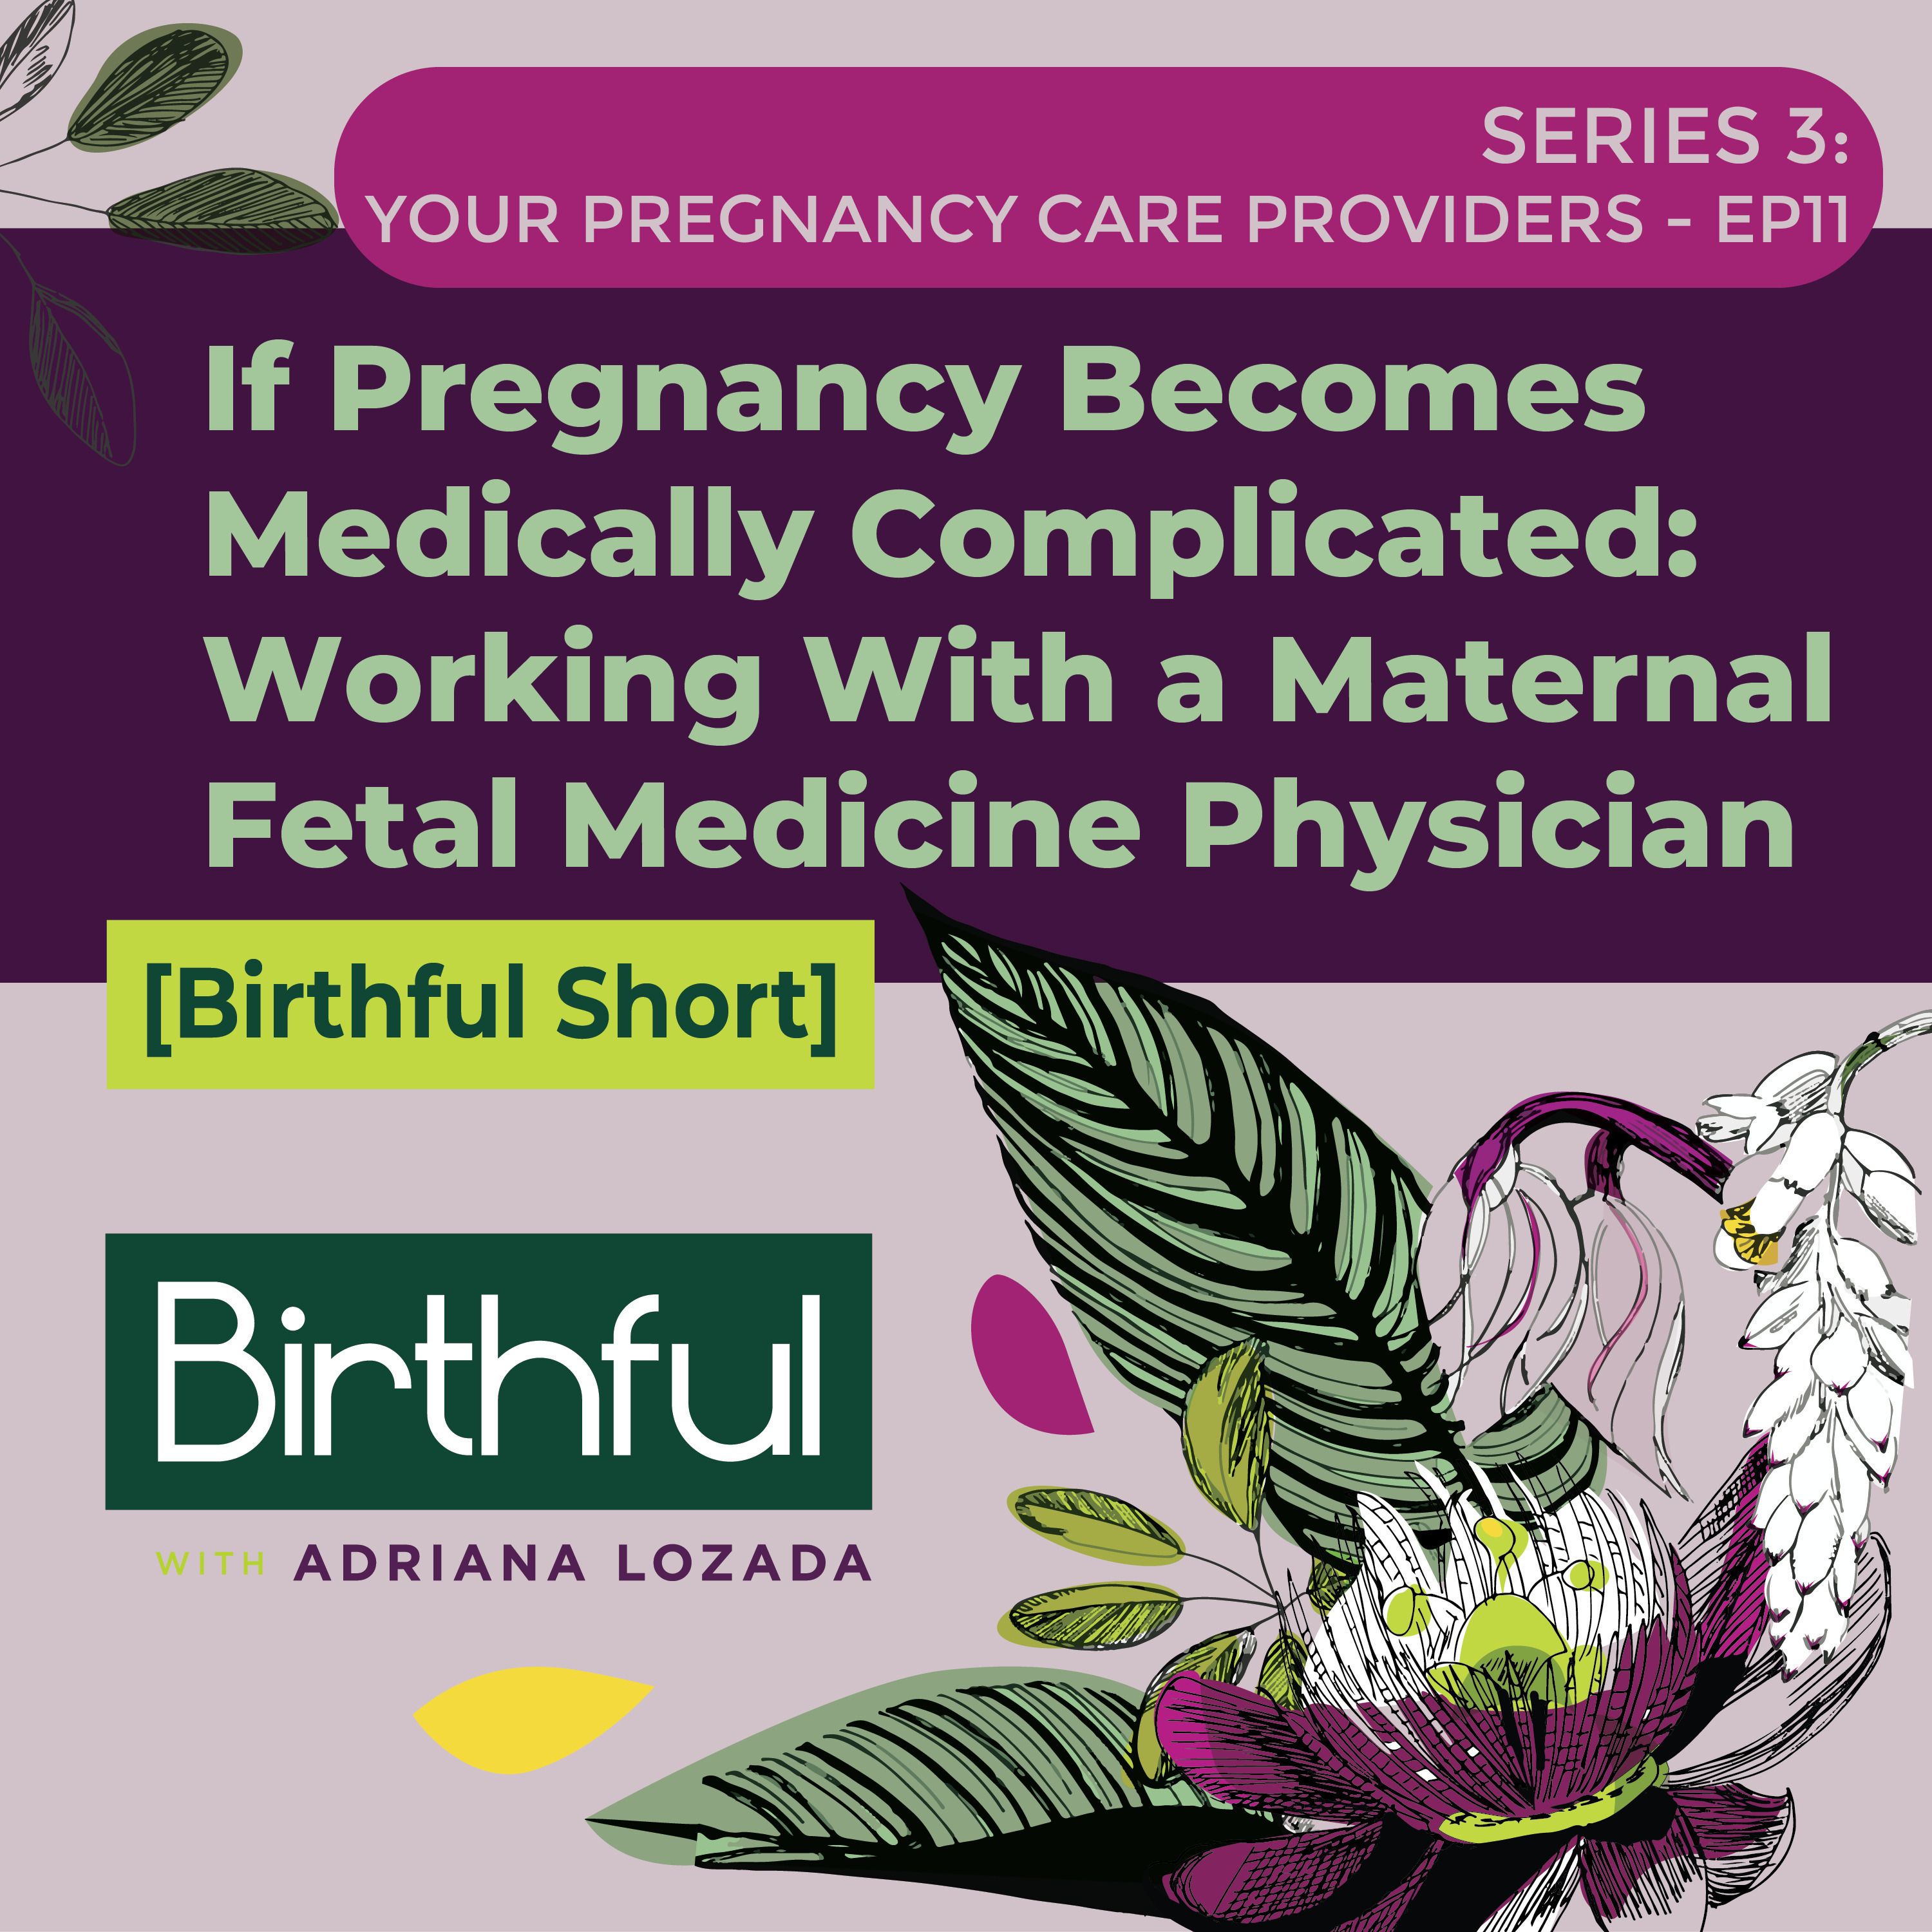 If Pregnancy Becomes Medically Complicated: Working With a Maternal Fetal Medicine Physician